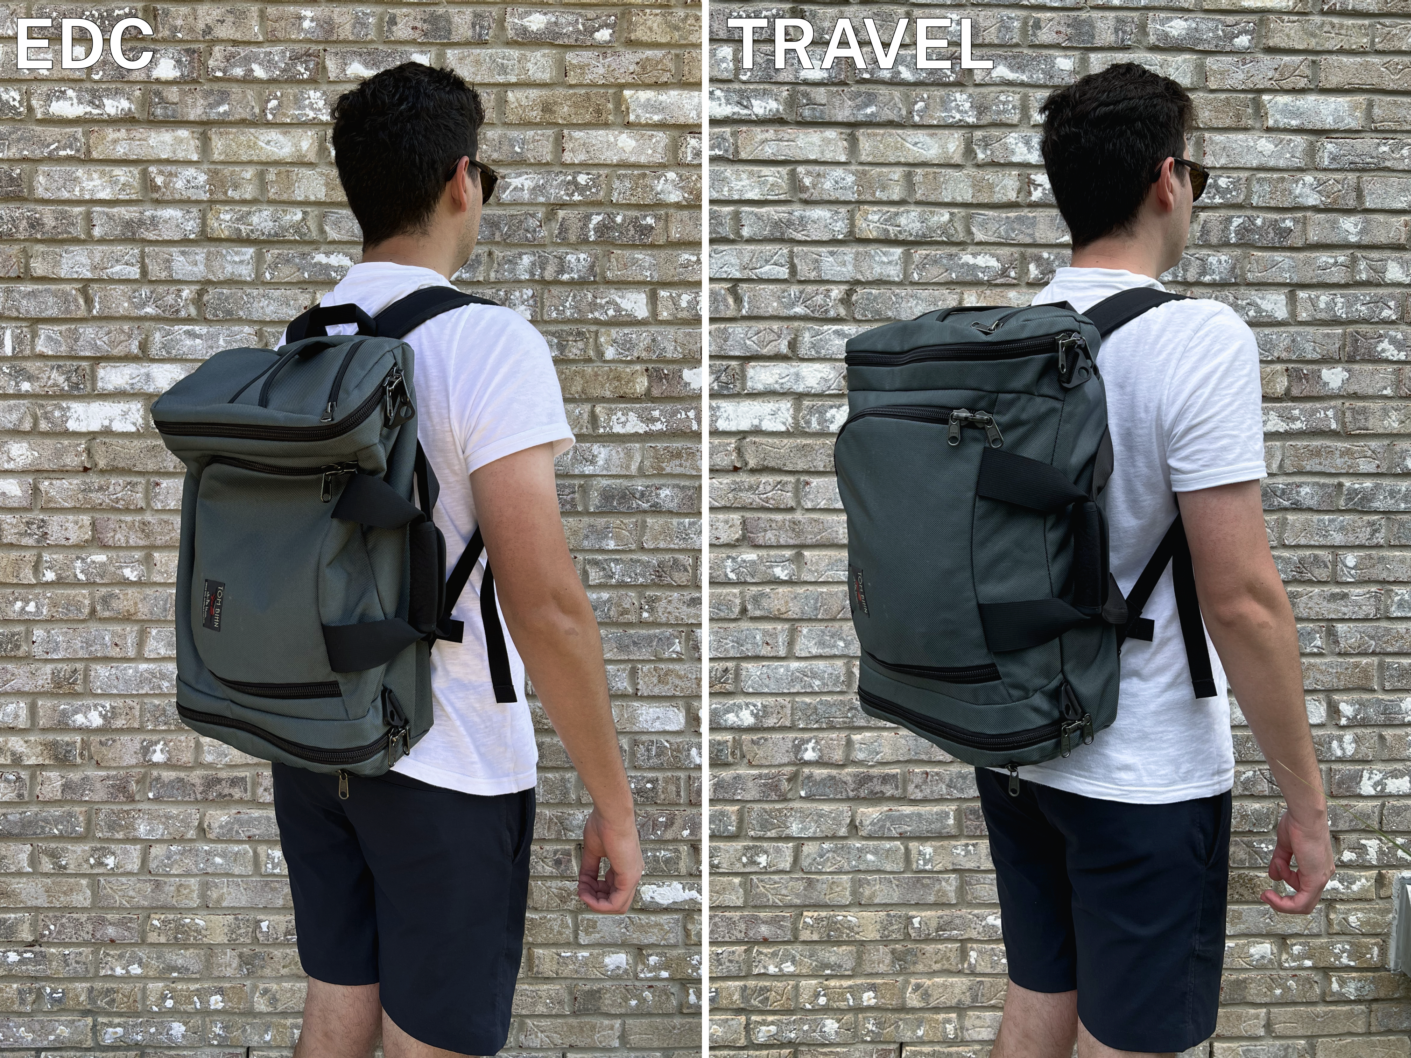 A comparison image between the Tom Bihn Aeronaut holding EDC and travel items